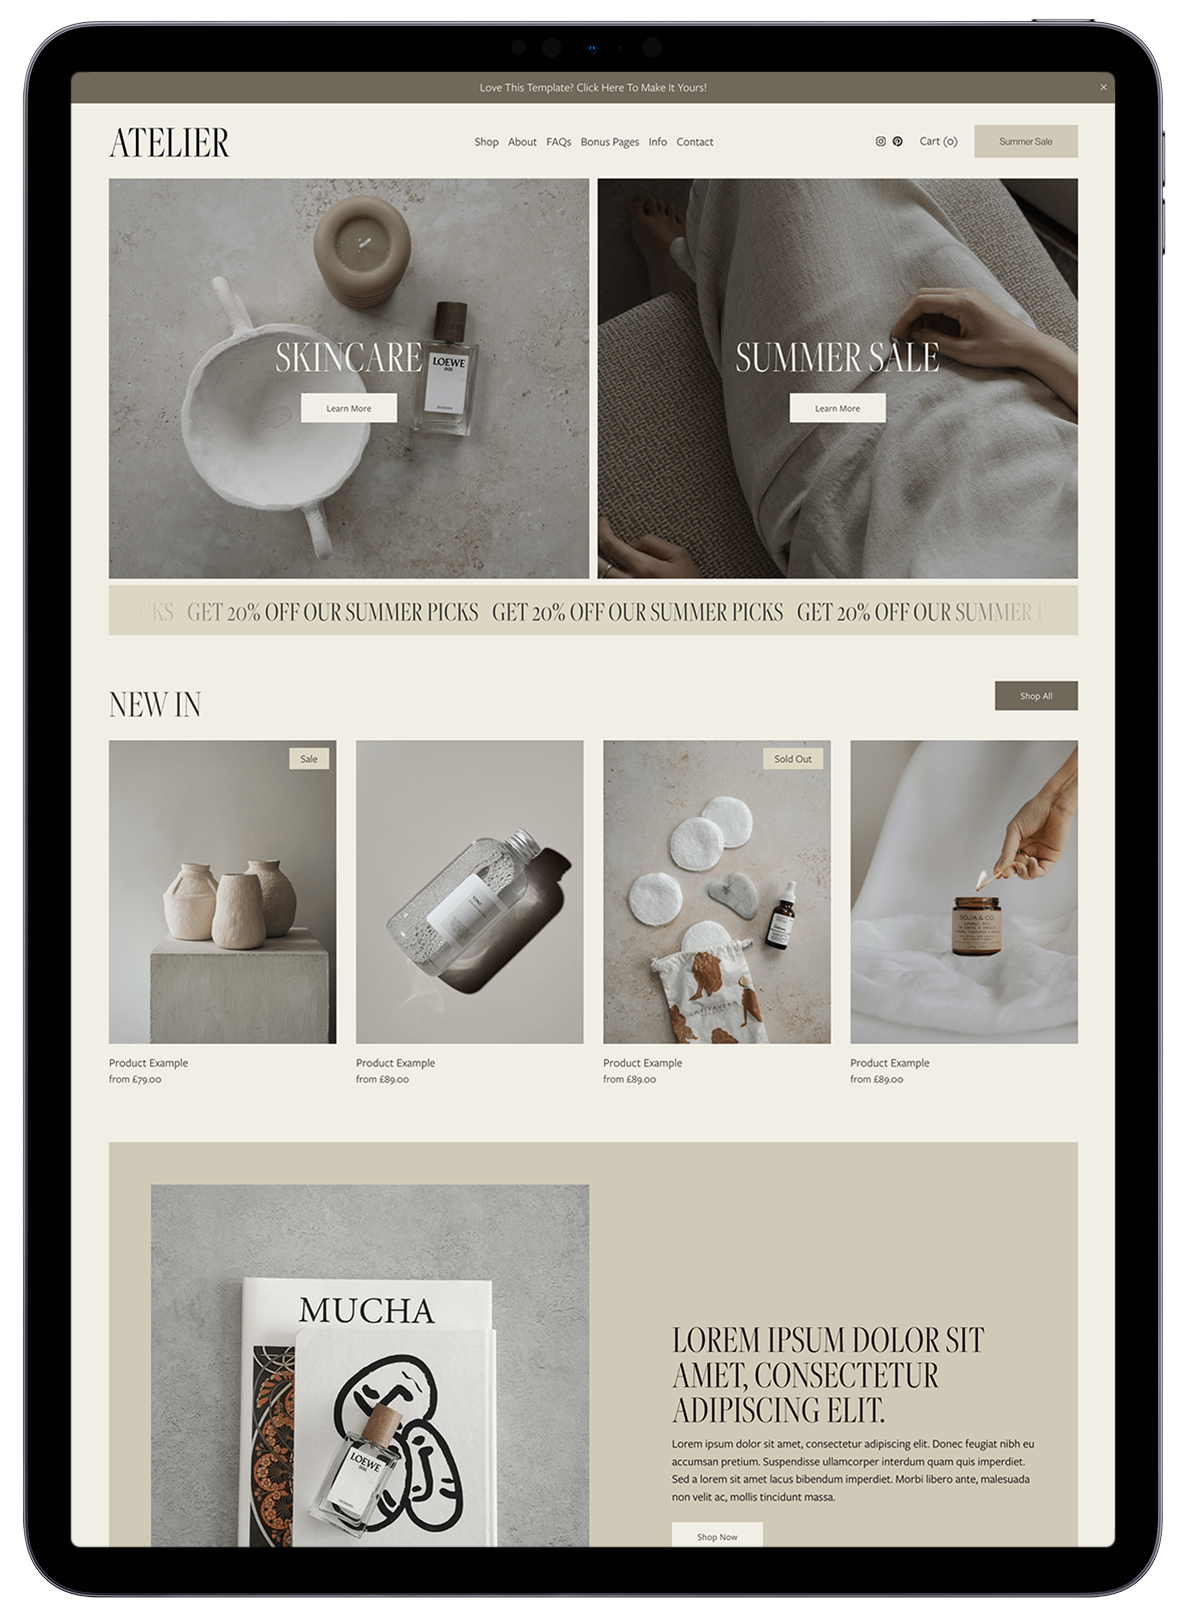 squarespace-template-kits-for-photographers-bloggers-stores-candor